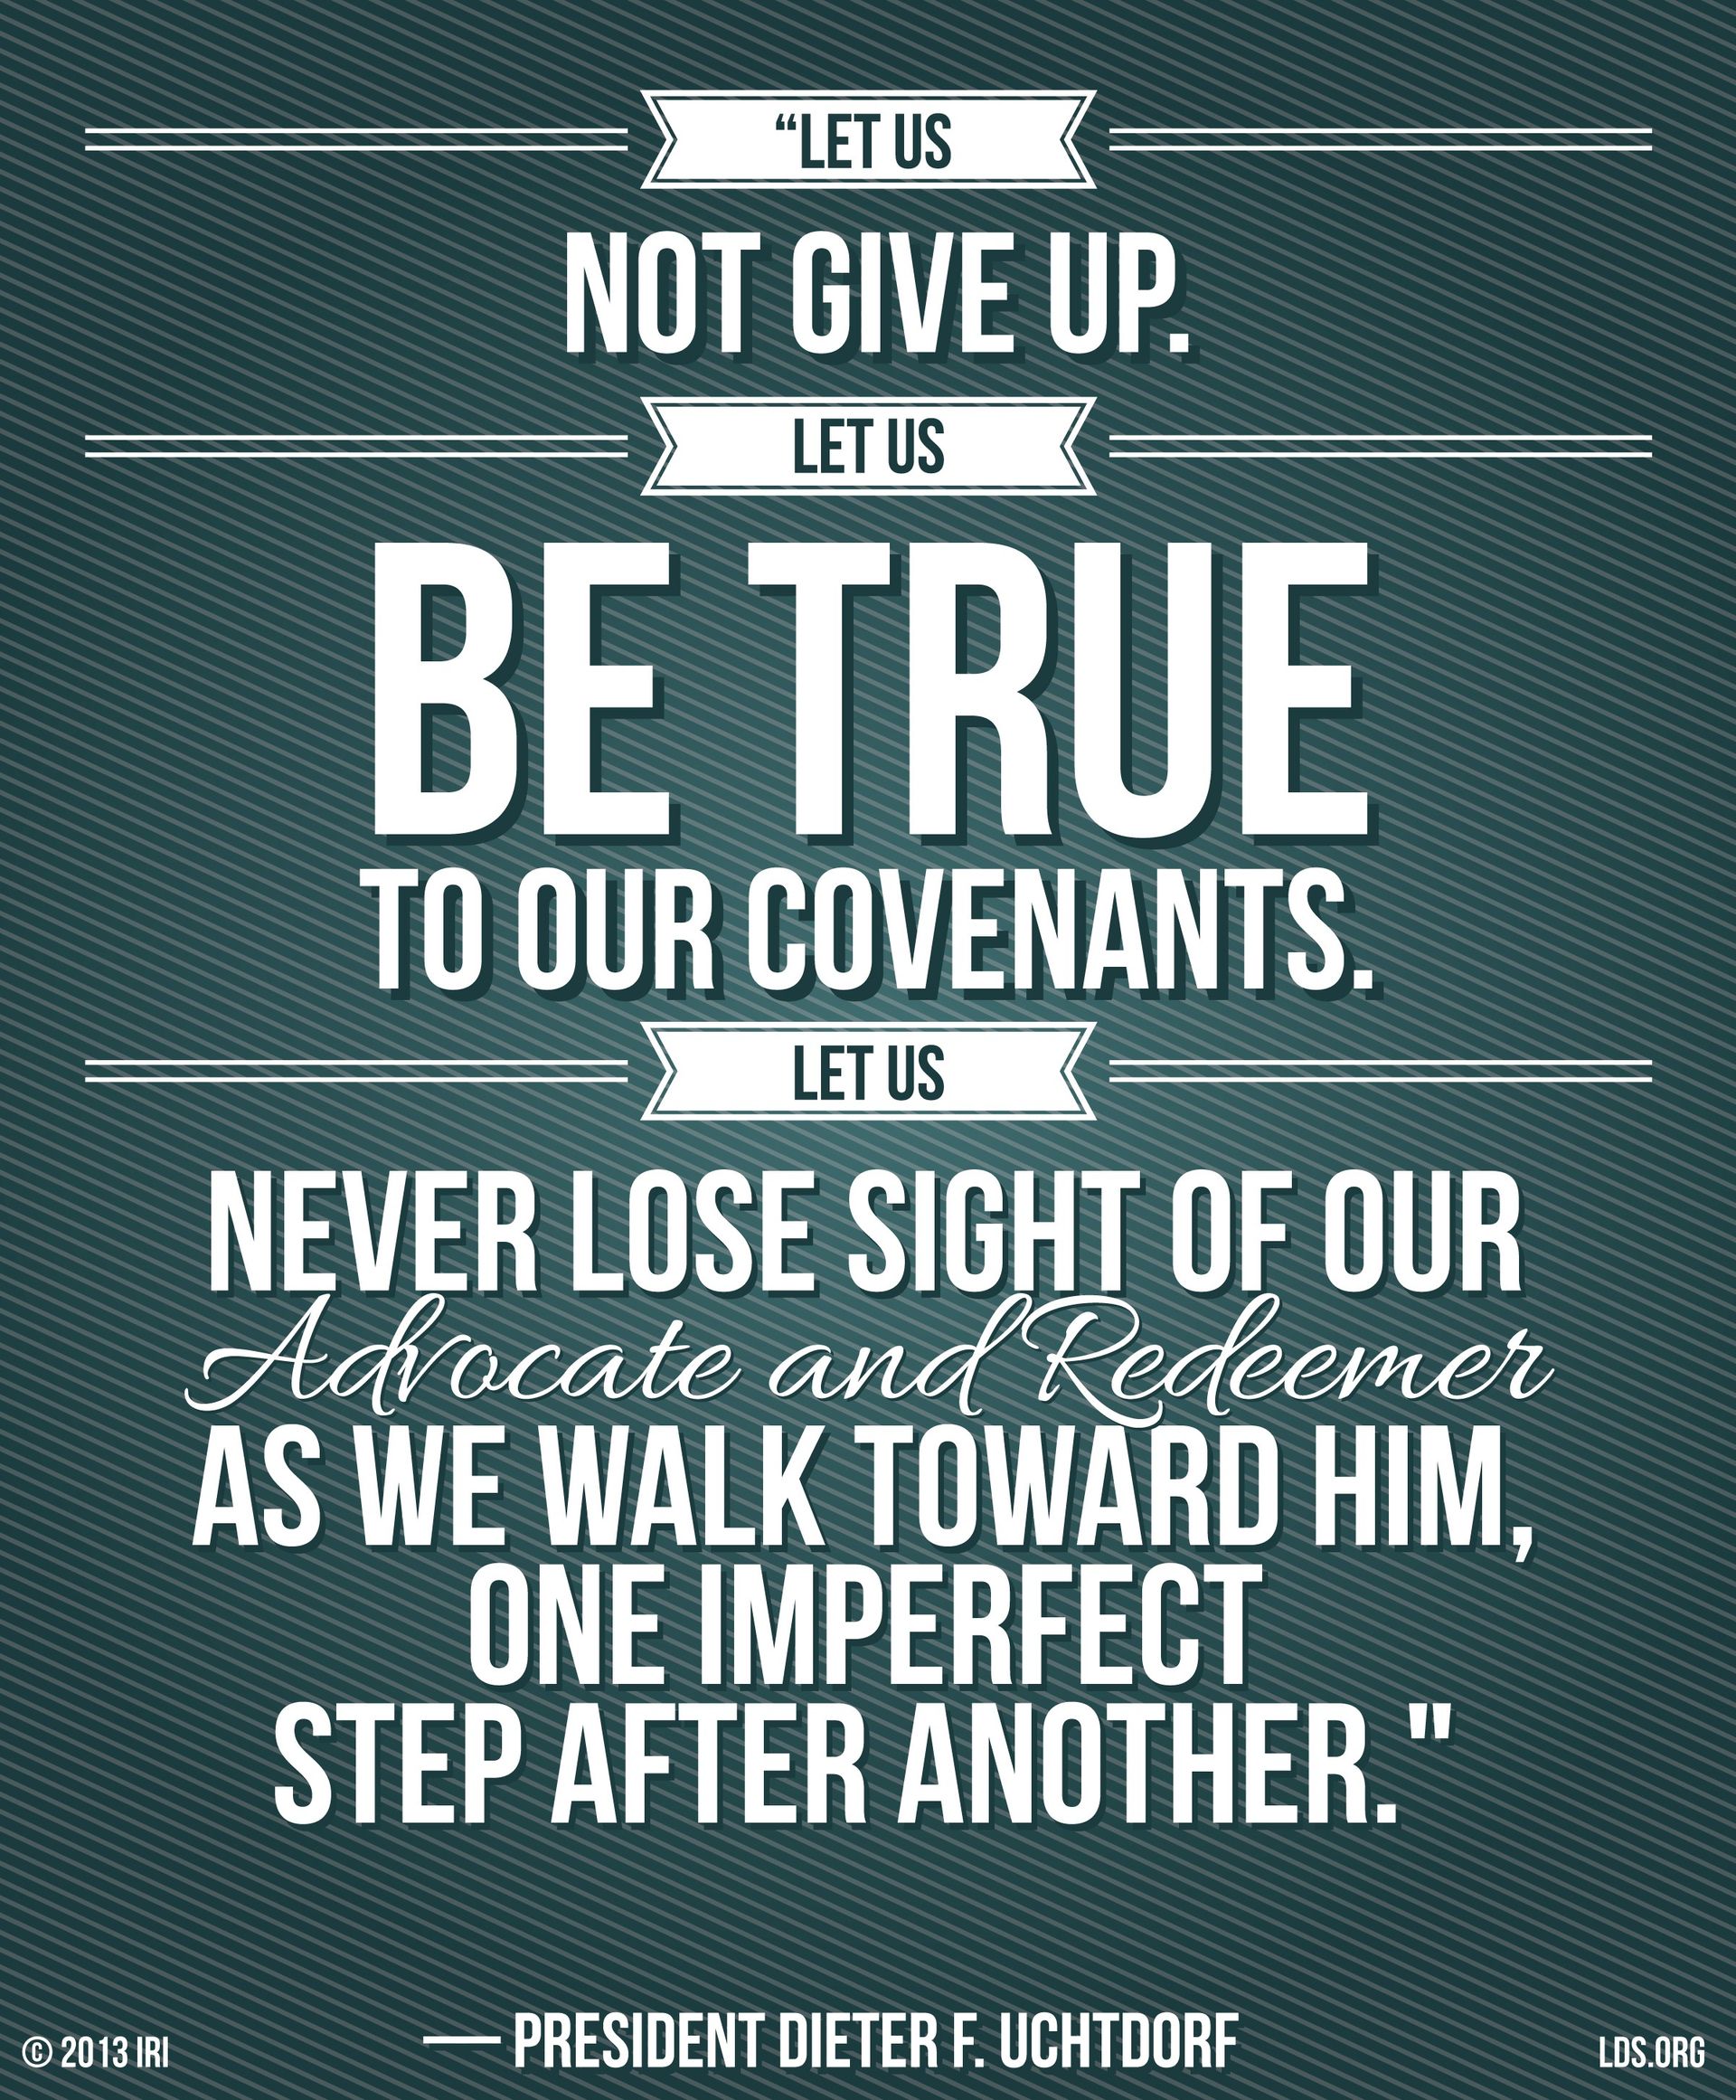 “Let us not give up. Let us be true to our covenants. Let us never lose sight of our Advocate and Redeemer as we walk toward Him, one imperfect step after another.”—President Dieter F. Uchtdorf, “Four Titles”